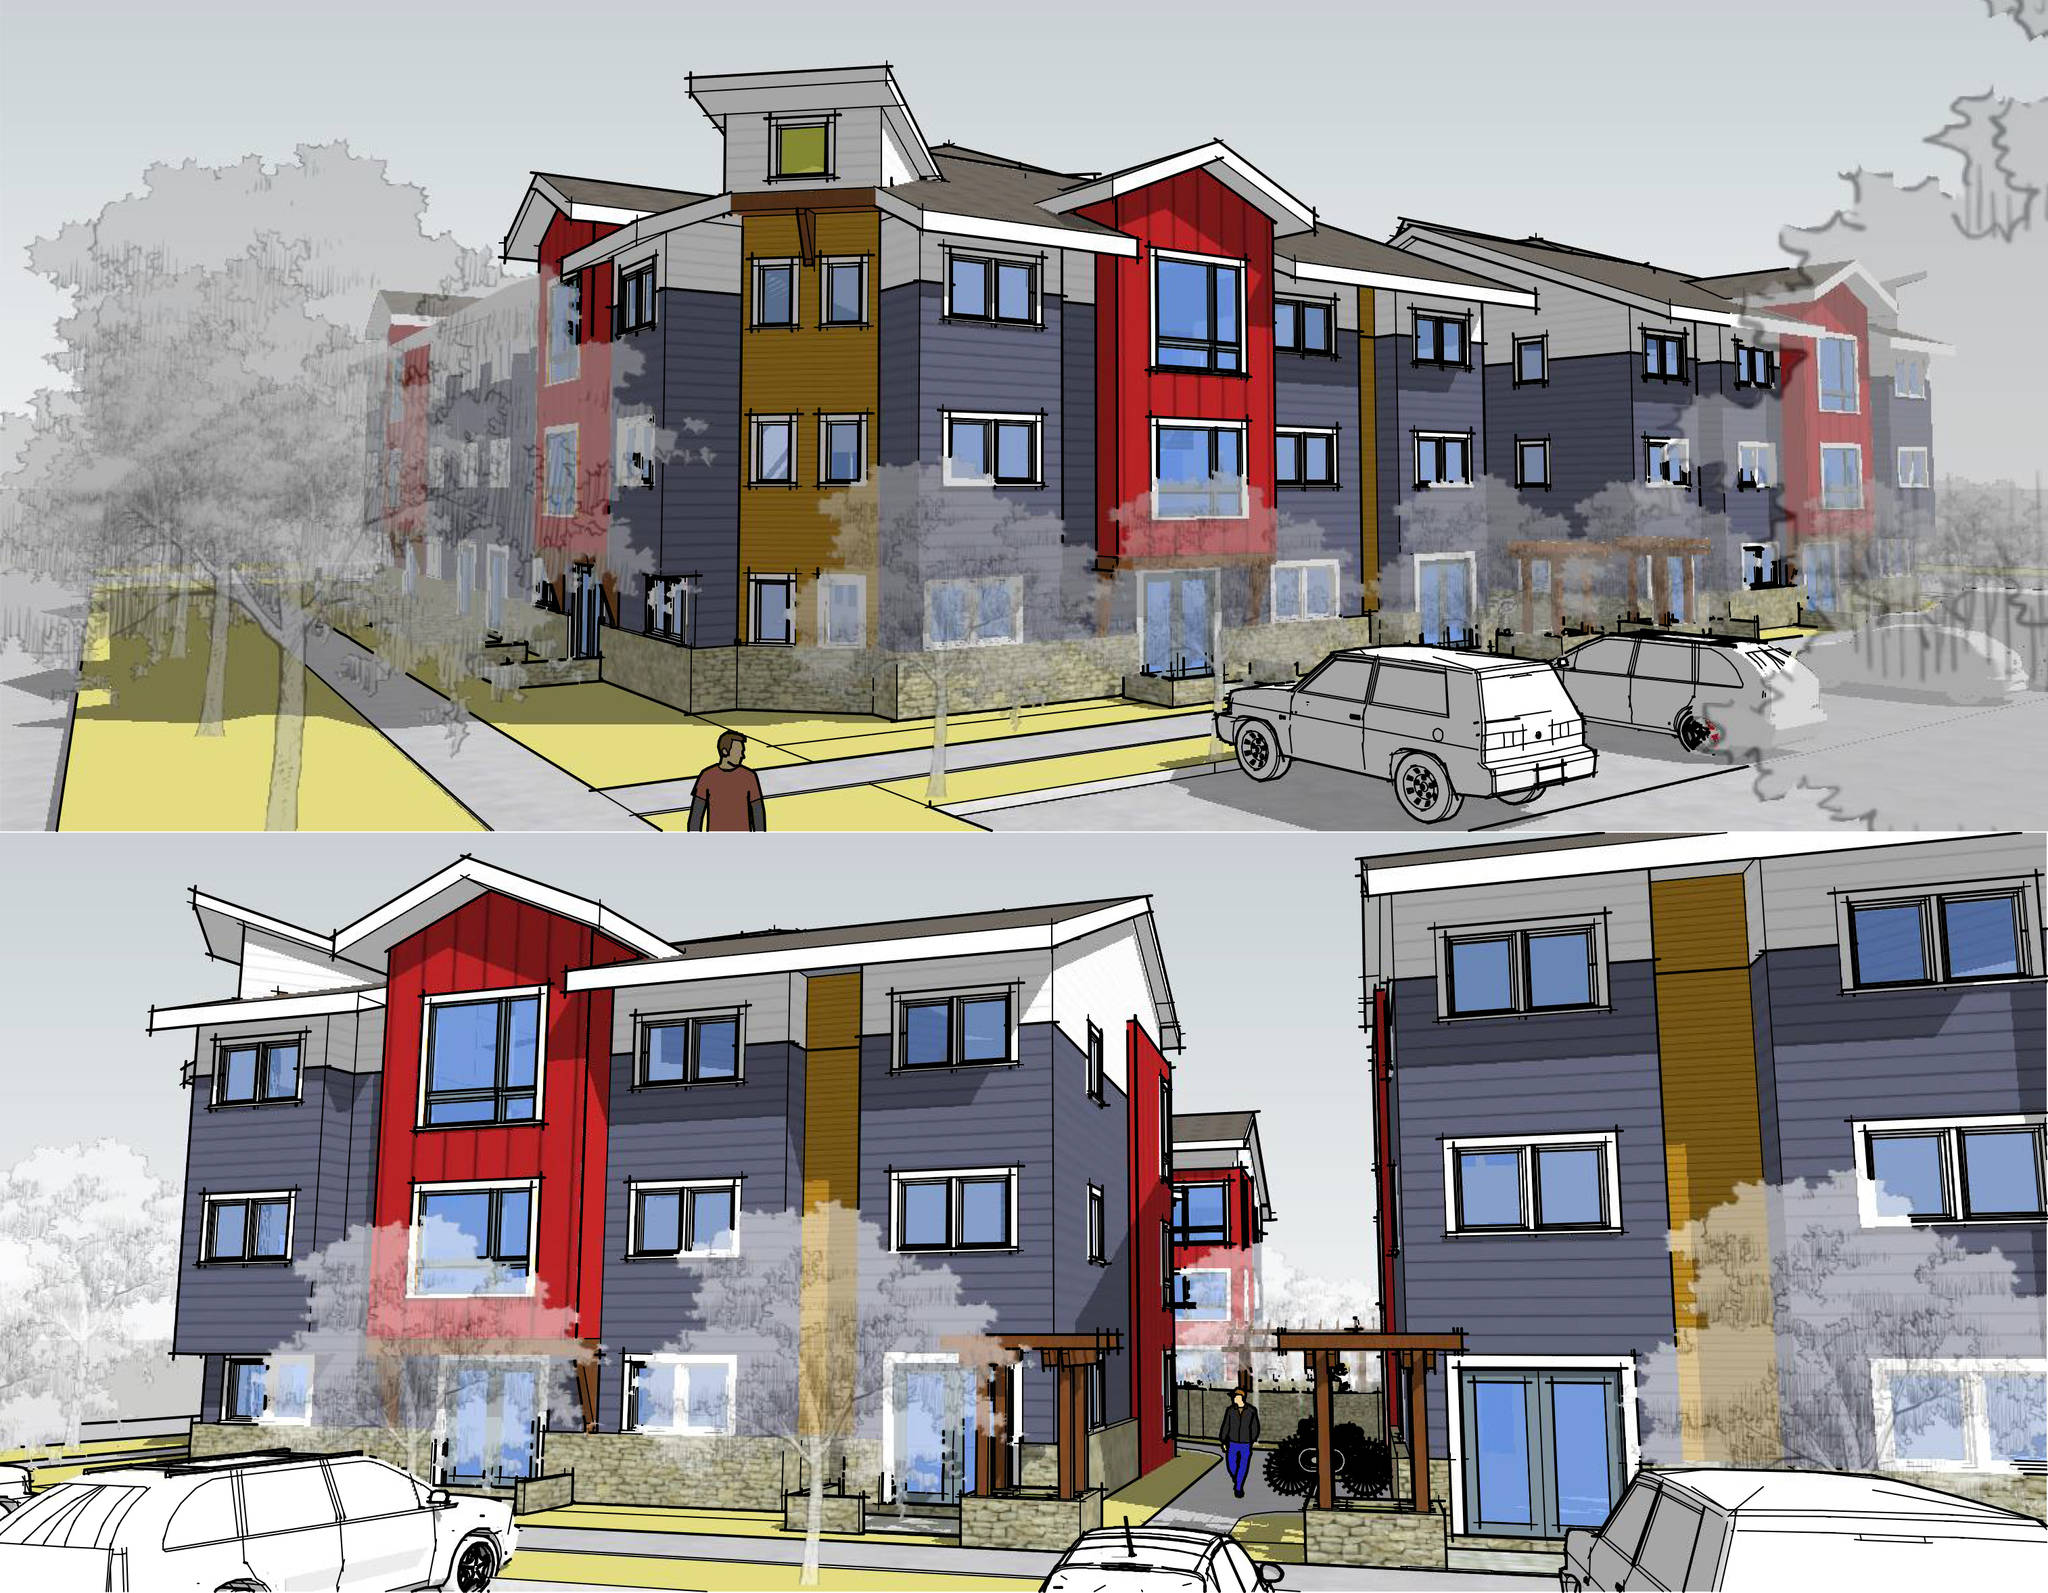 31st Avenue Apartments could be trendsetter in Arlington multi-family housing